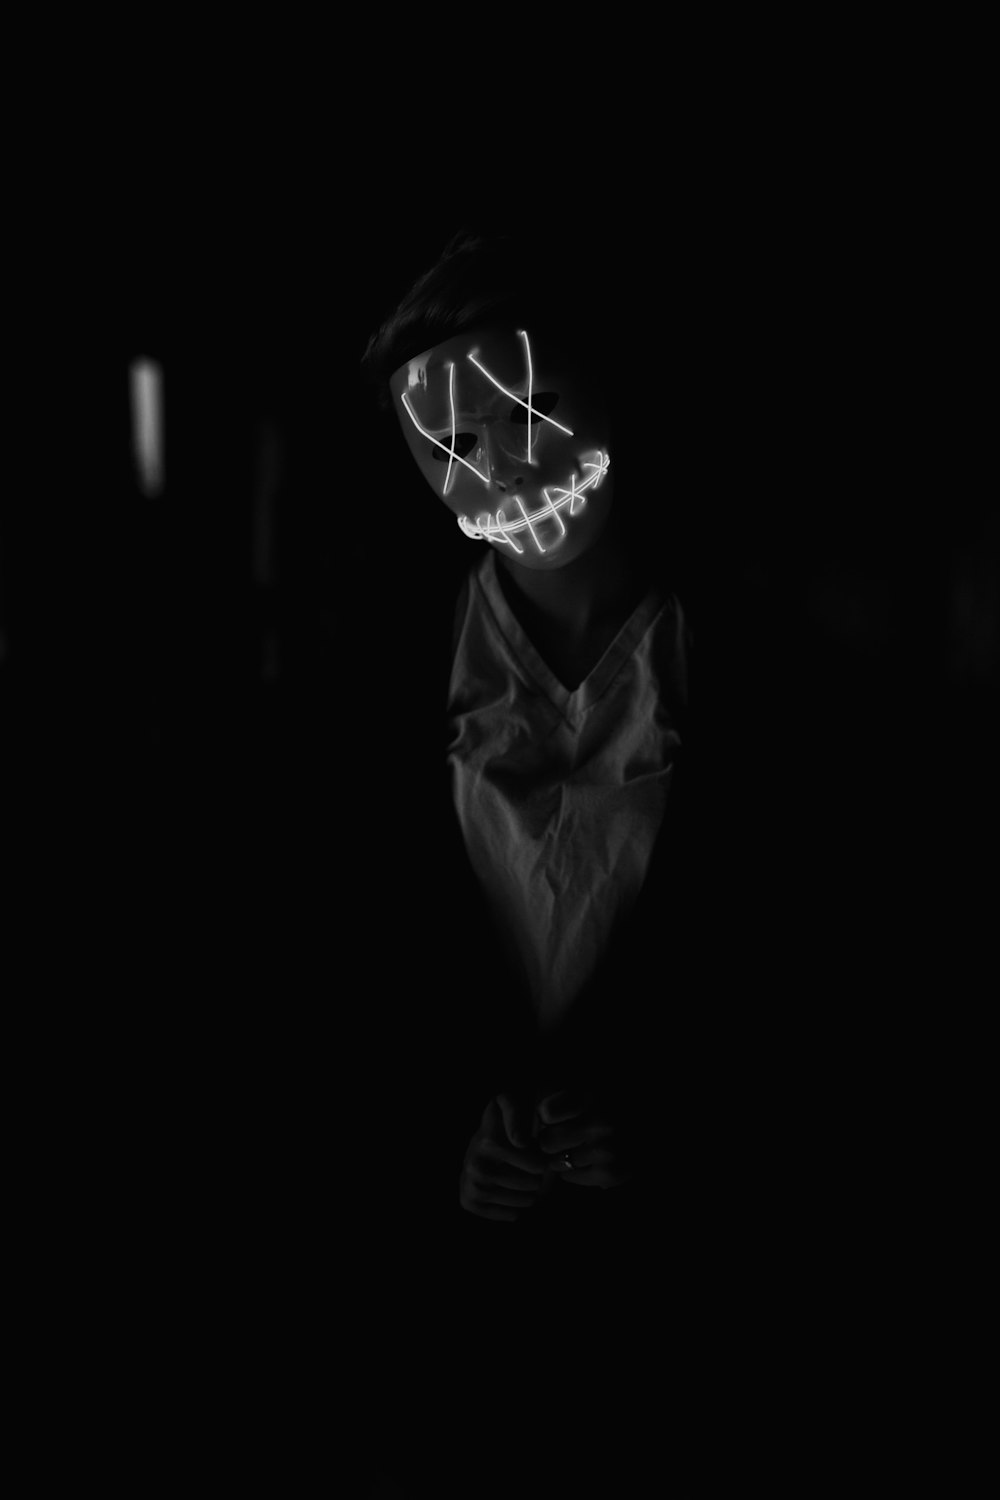 a black and white photo of a person wearing a mask